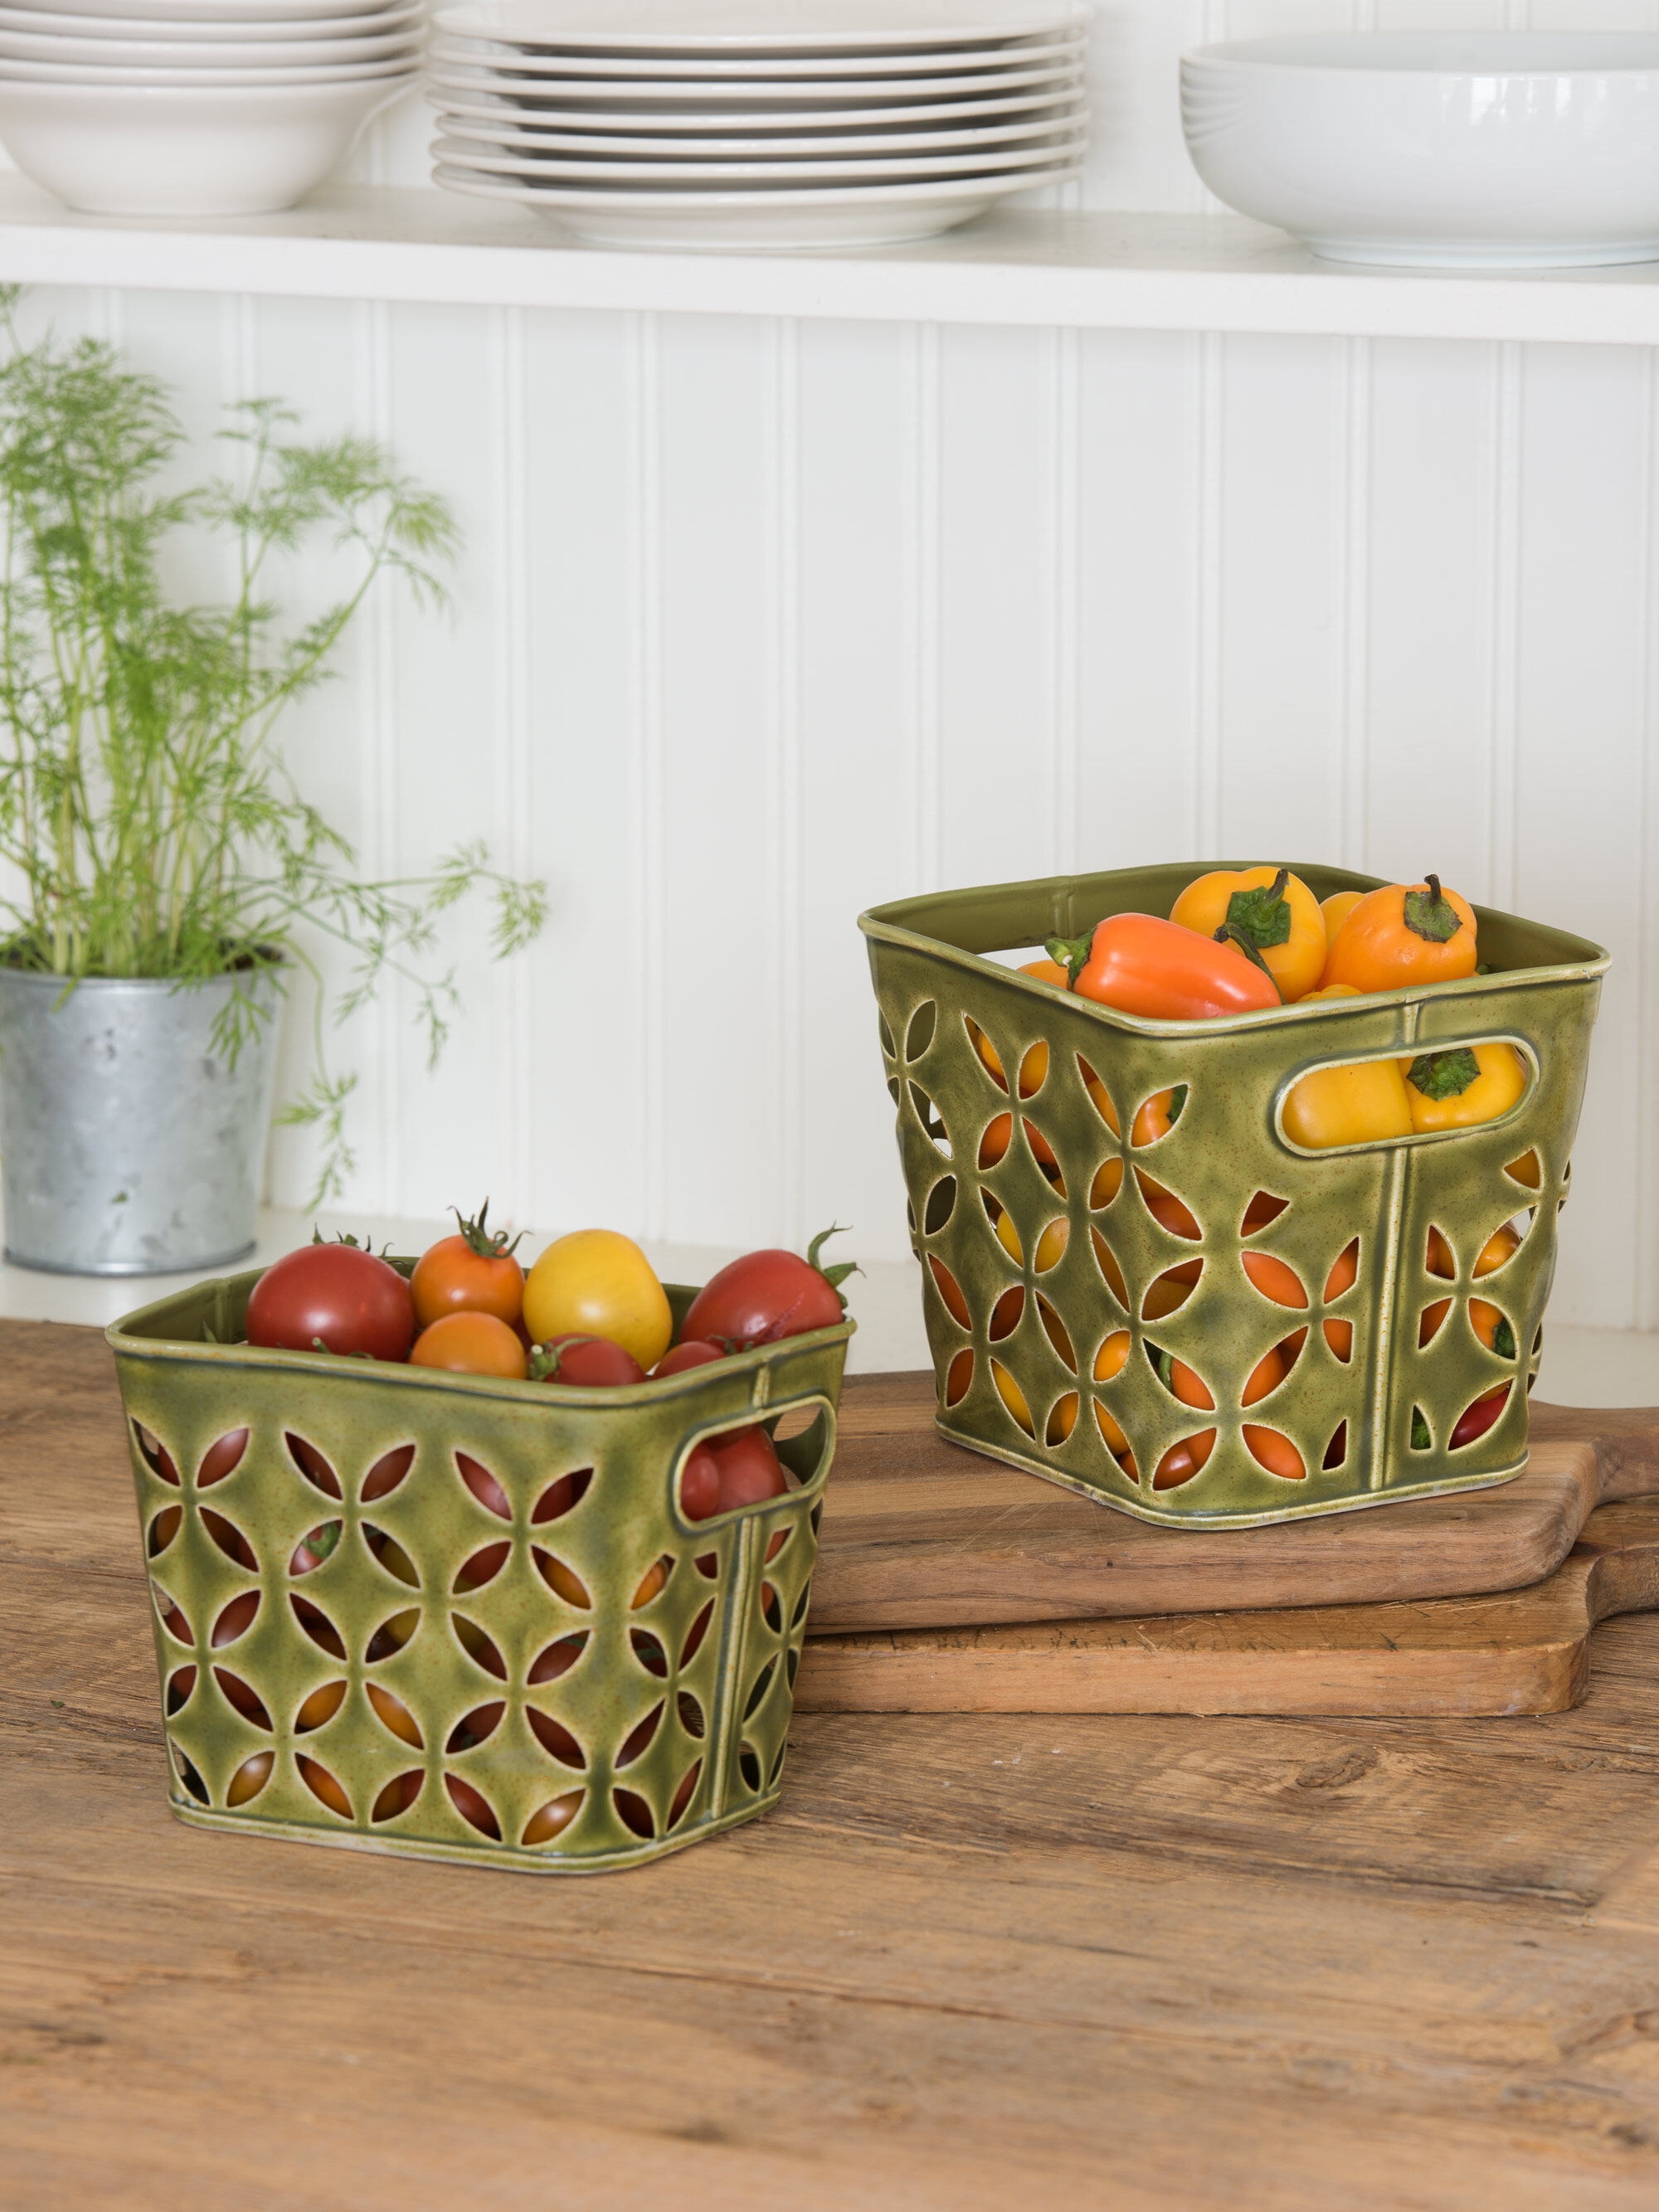 Countertop Fruit Baskets Set - Metal Pantry Storage Containers